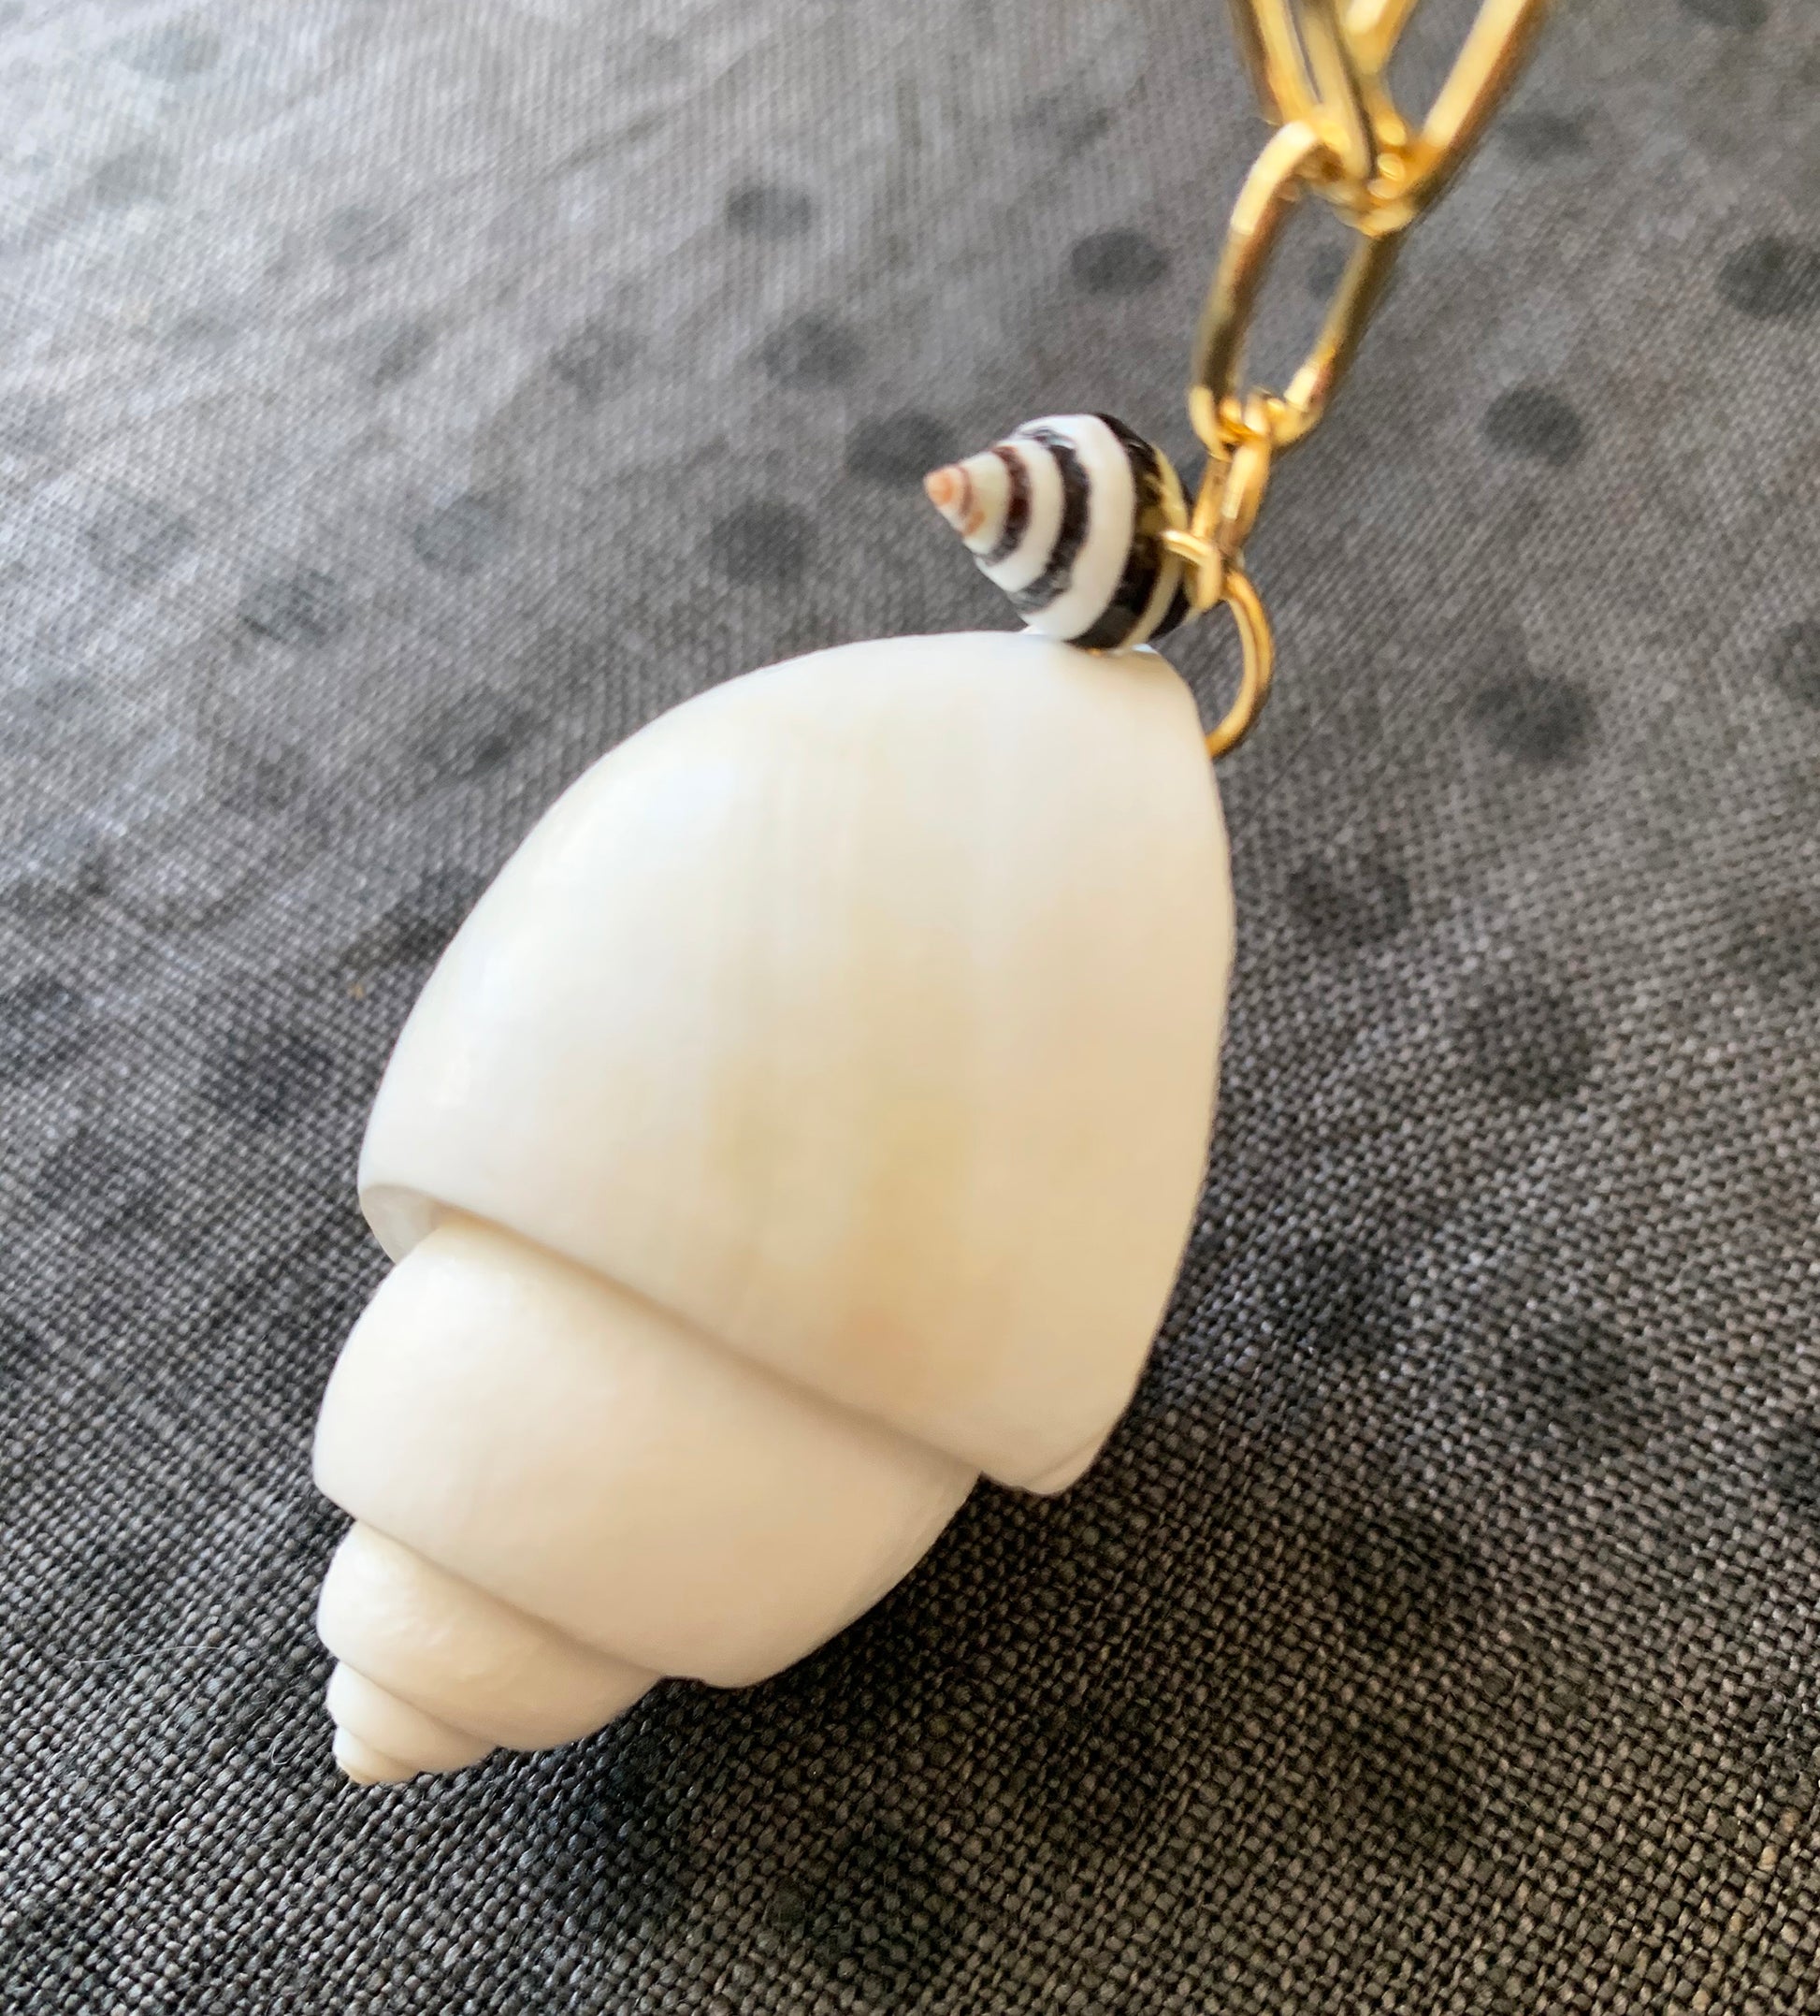 White Tulip Seashell Pendant Necklace with Black & White Striped Shell Charm